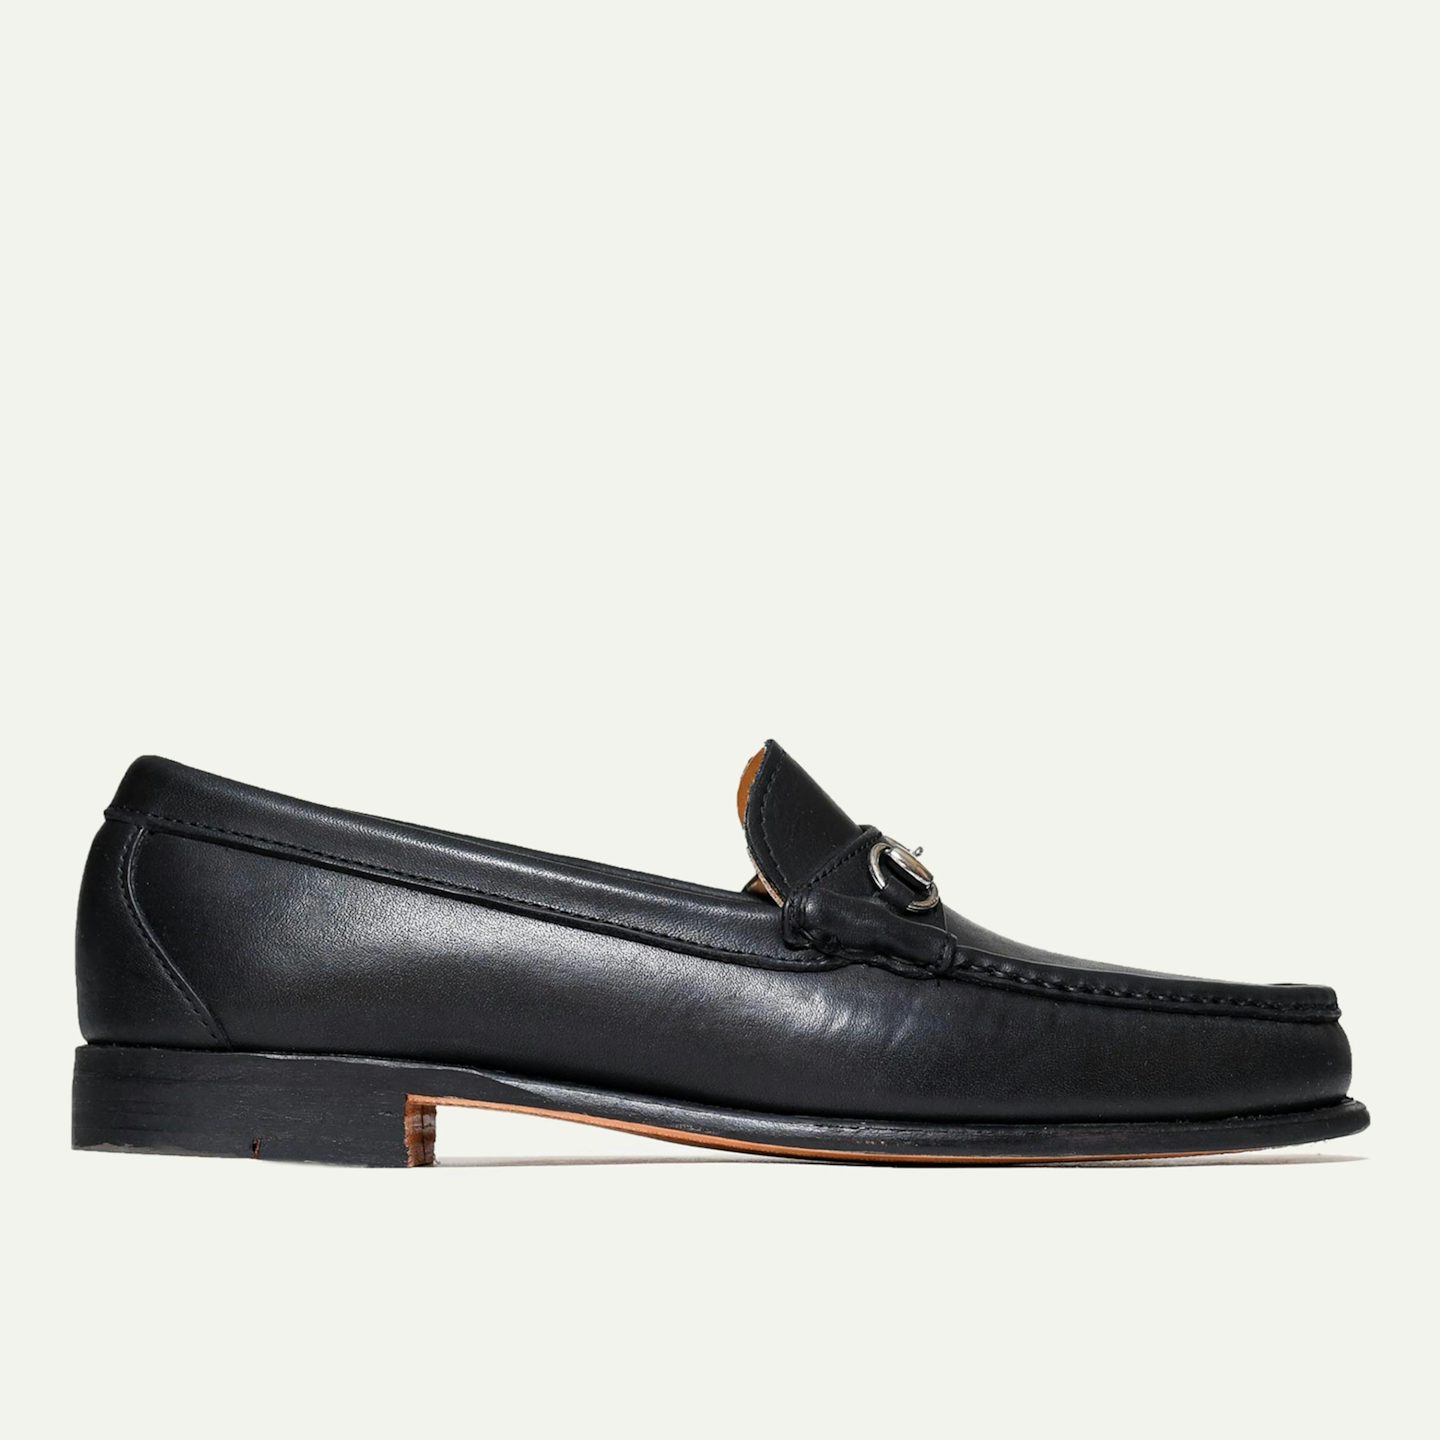 Bit Loafer - Black Calfskin, Leather Sole with Dovetail Toplift